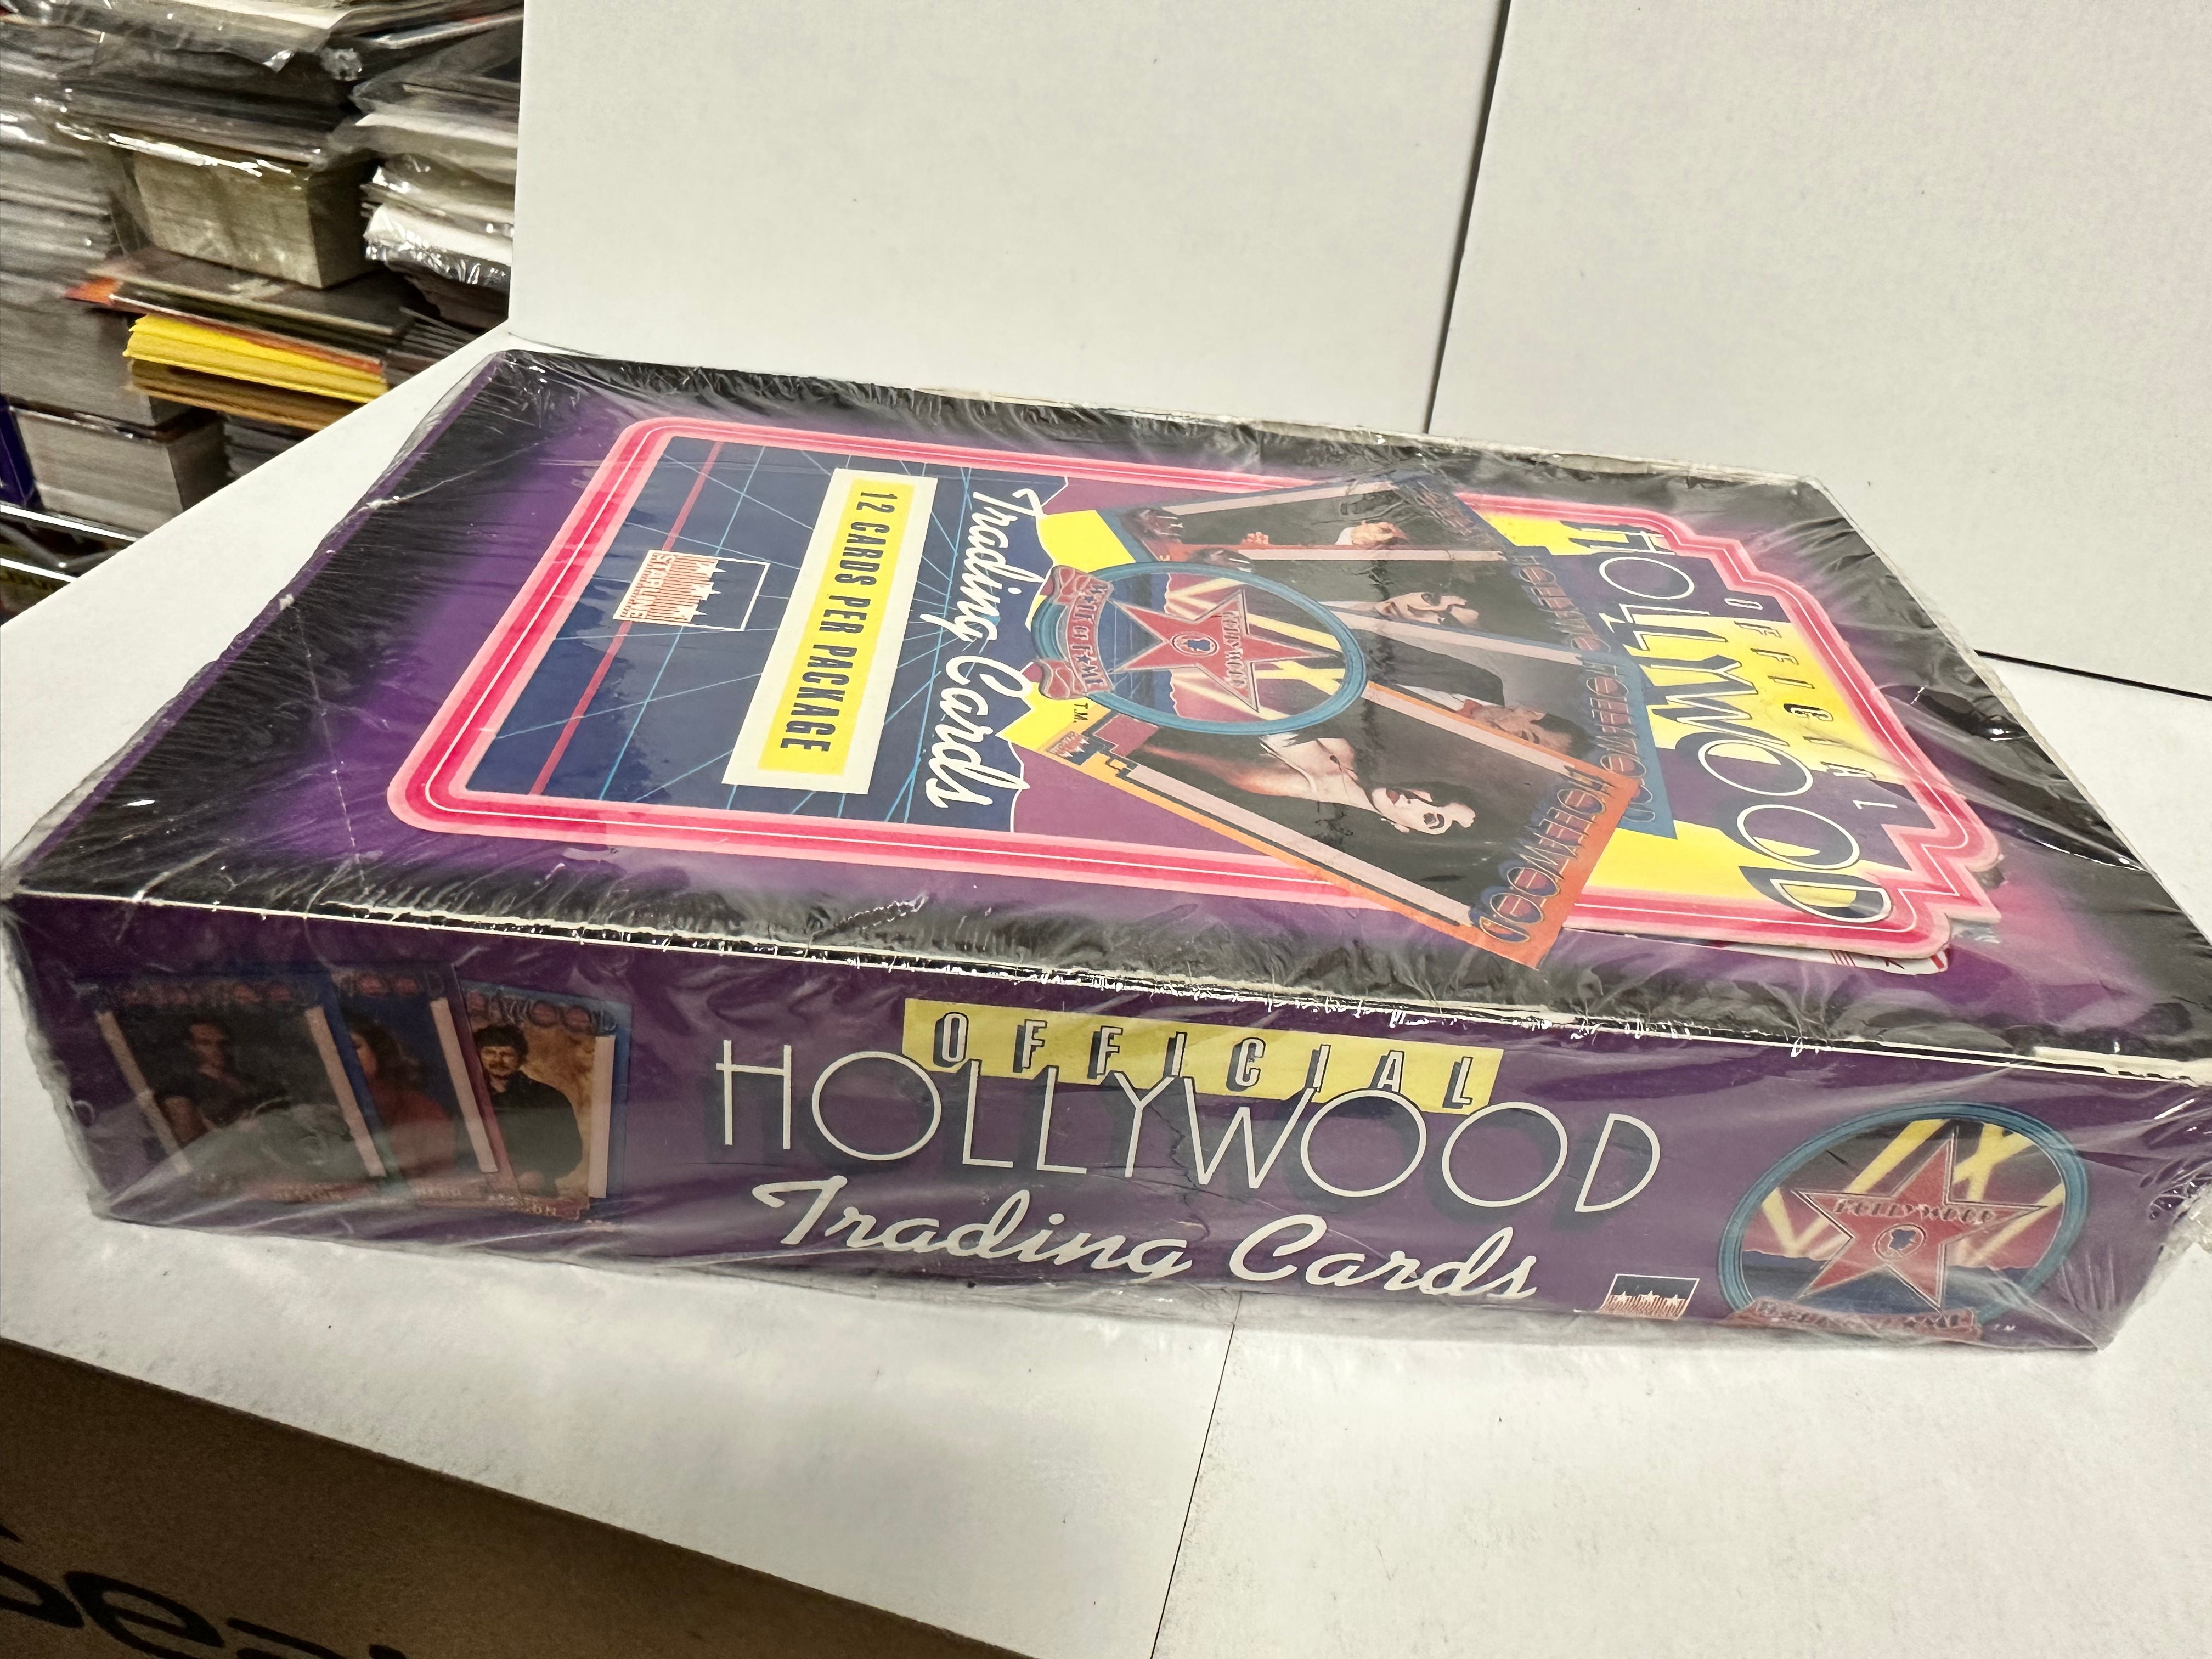 Hollywood Walk of Fame cards 36 packs box 1992